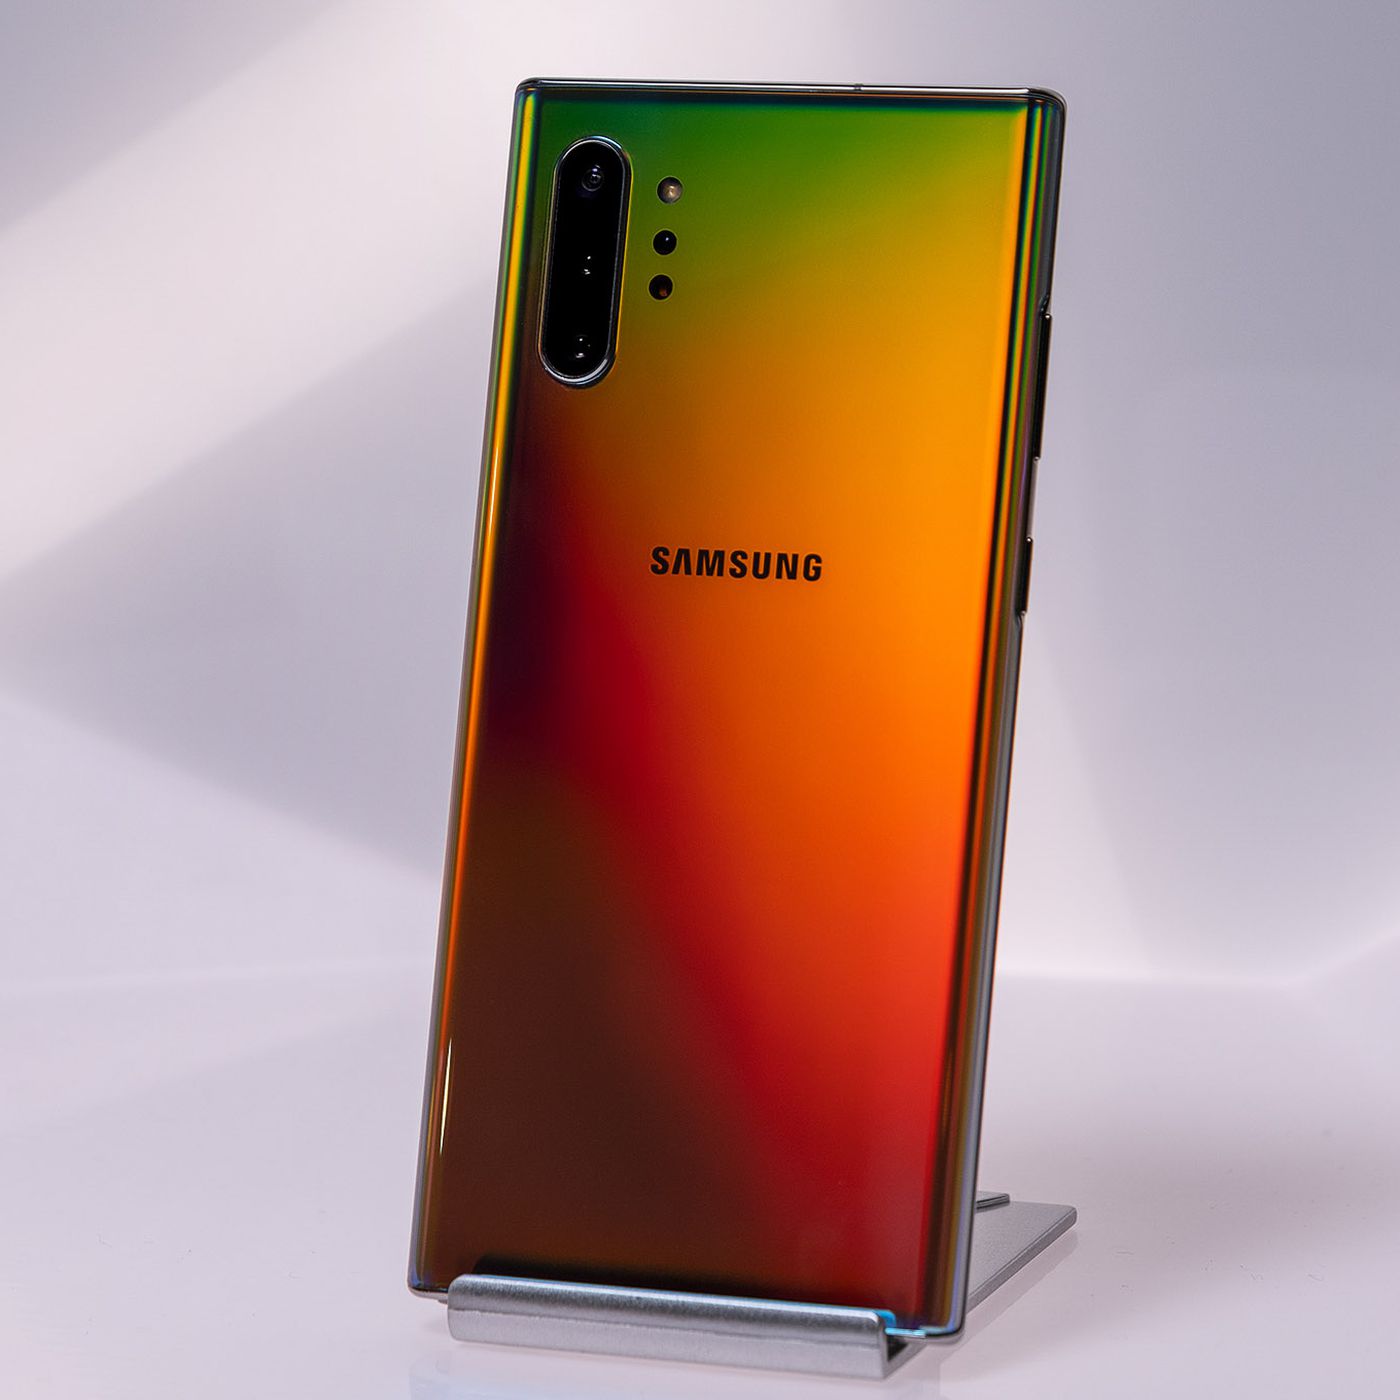 Samsung S Galaxy Note 10 Plus 5g Will Start At 1 300 The Verge